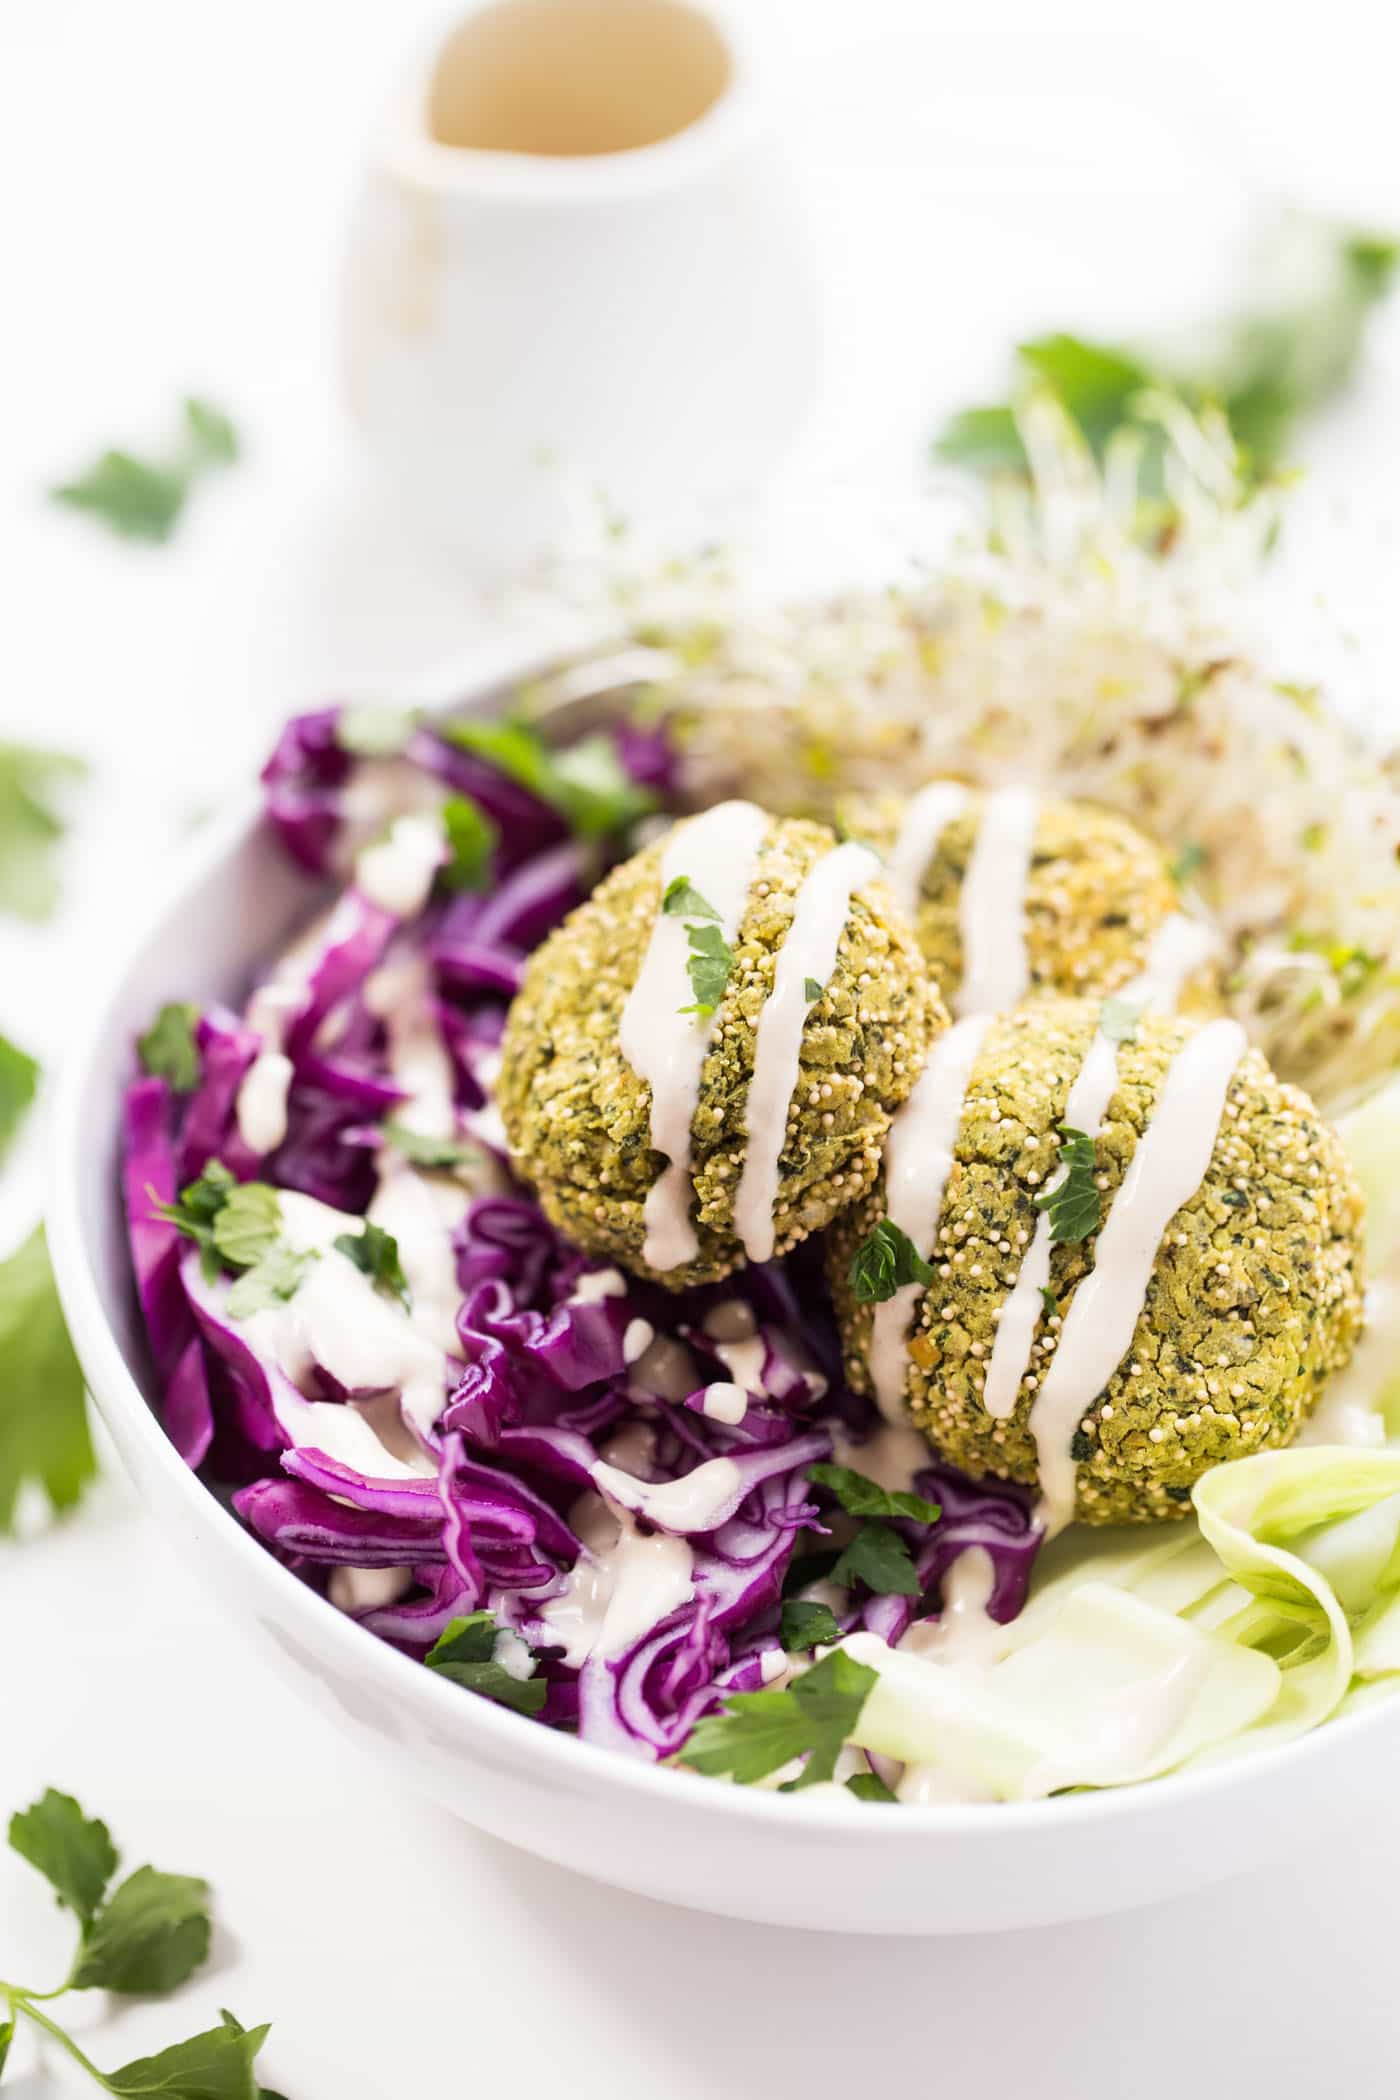 These BAKED Vegan Falafel are made with just 9 ingredients, take 20 minutes to bake and taste AMAZING!